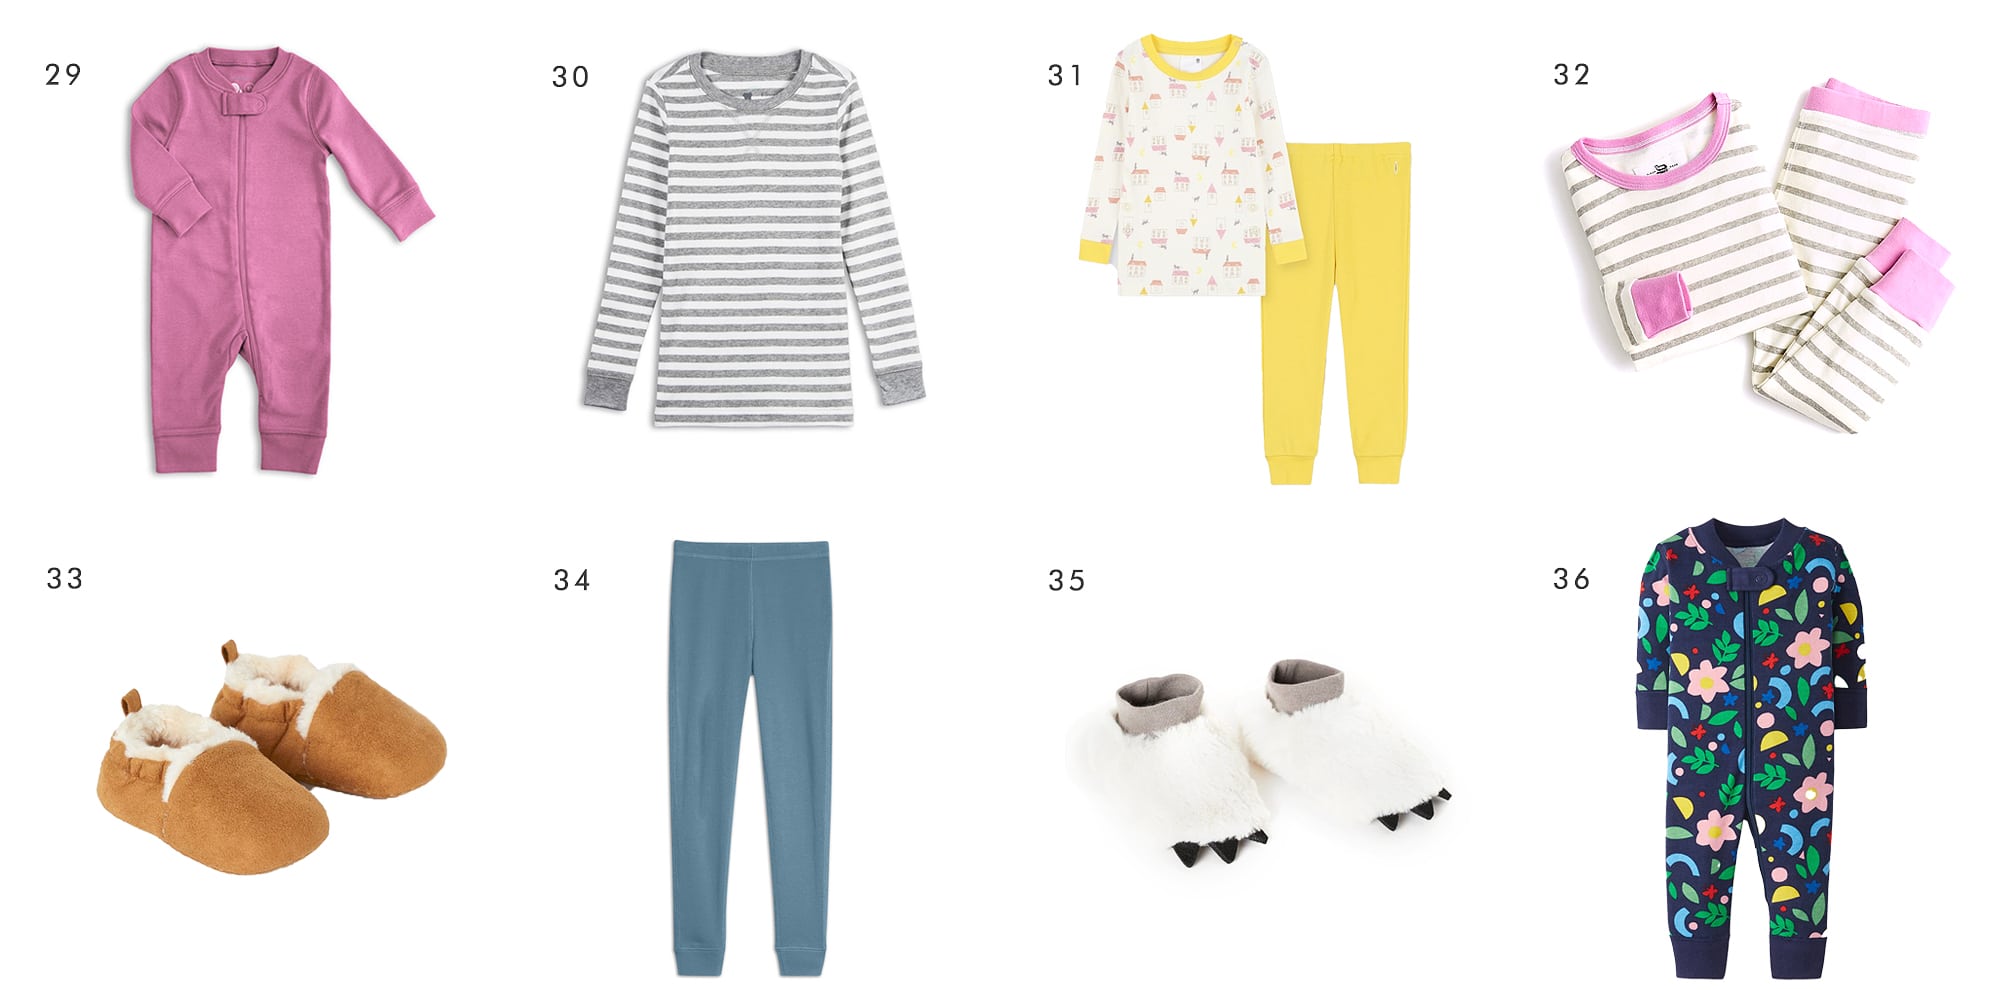 How we choose, shop and keep our toddler's clothing under control | via Yellow Brick Home